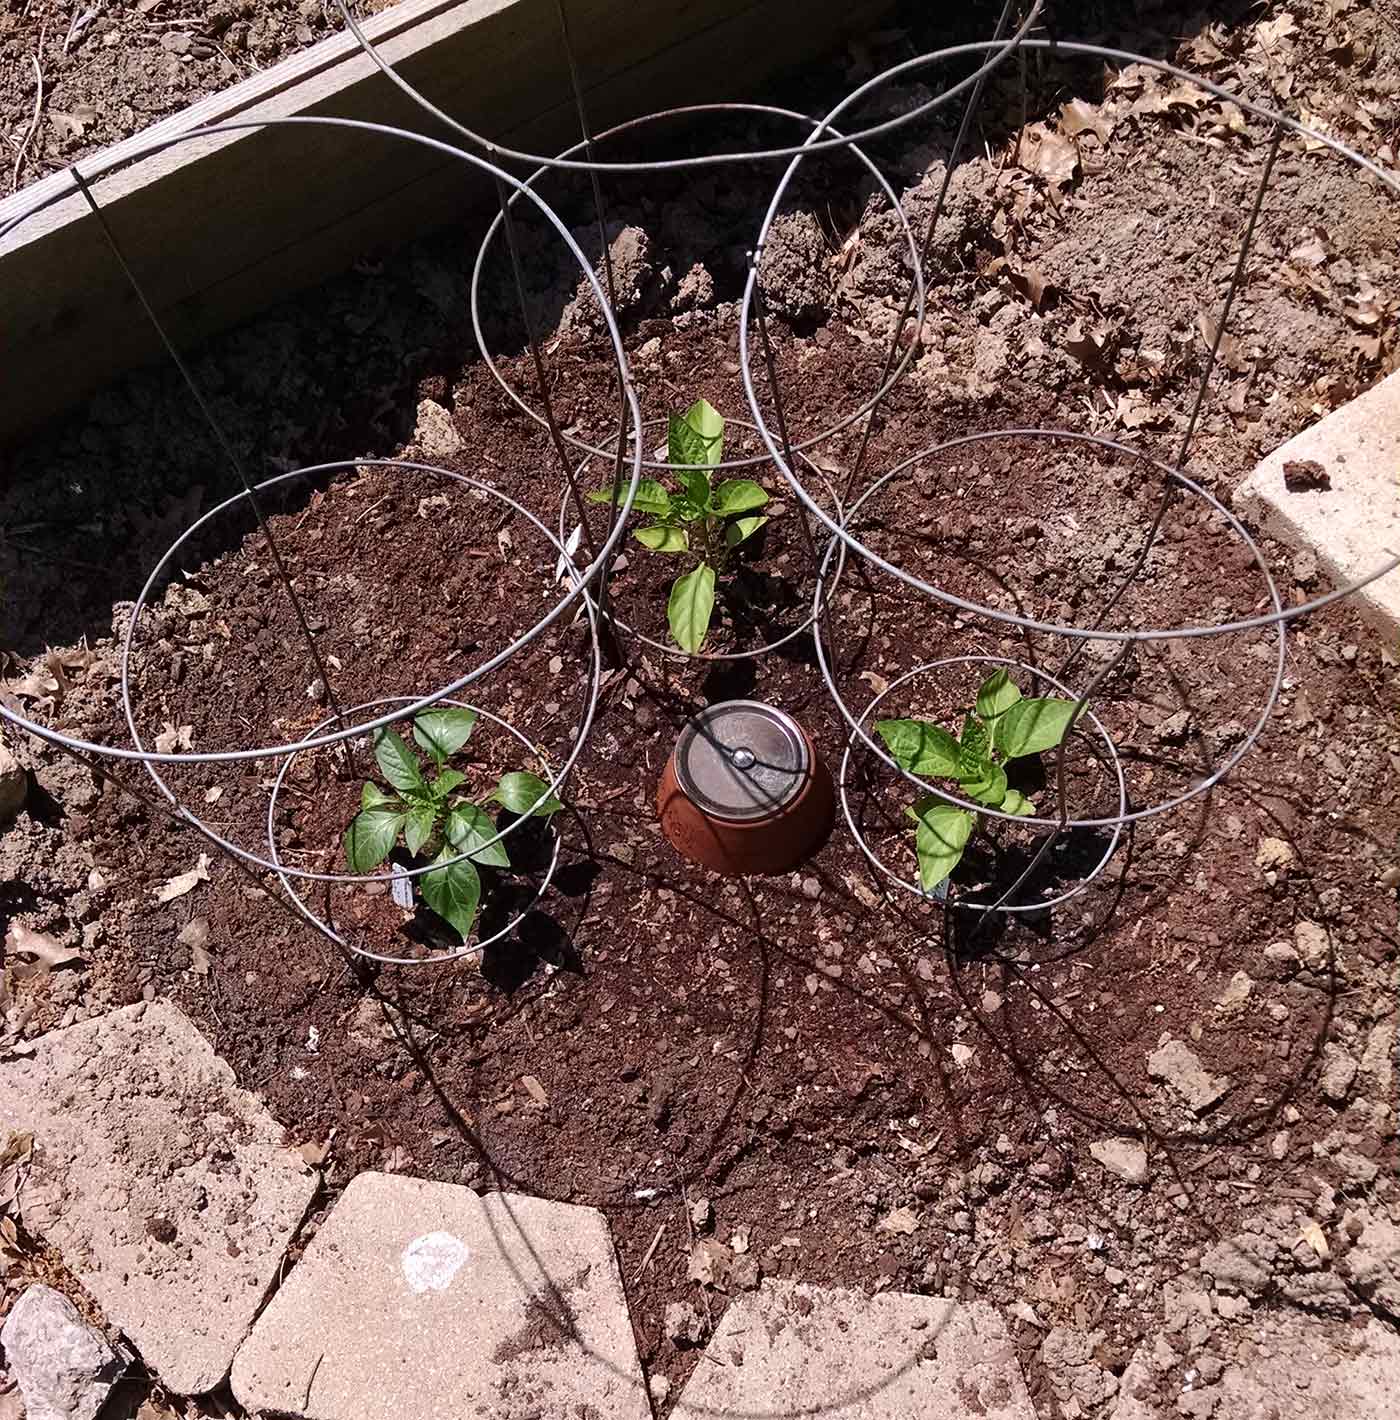 Three pepper plants buried next to a large terracotta olla.